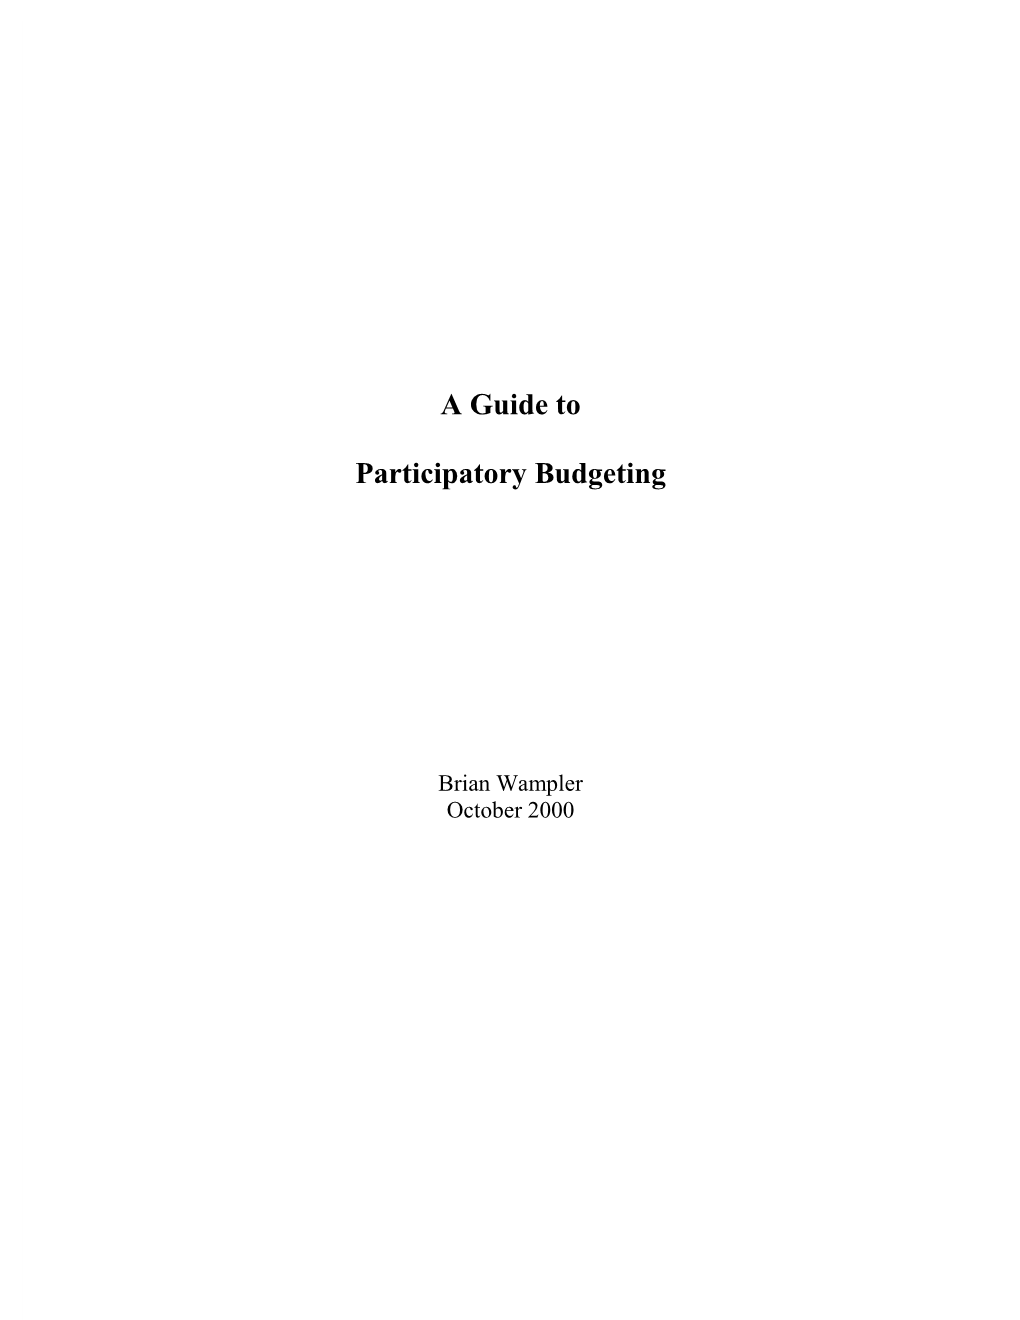 A Guide to Participatory Budgeting